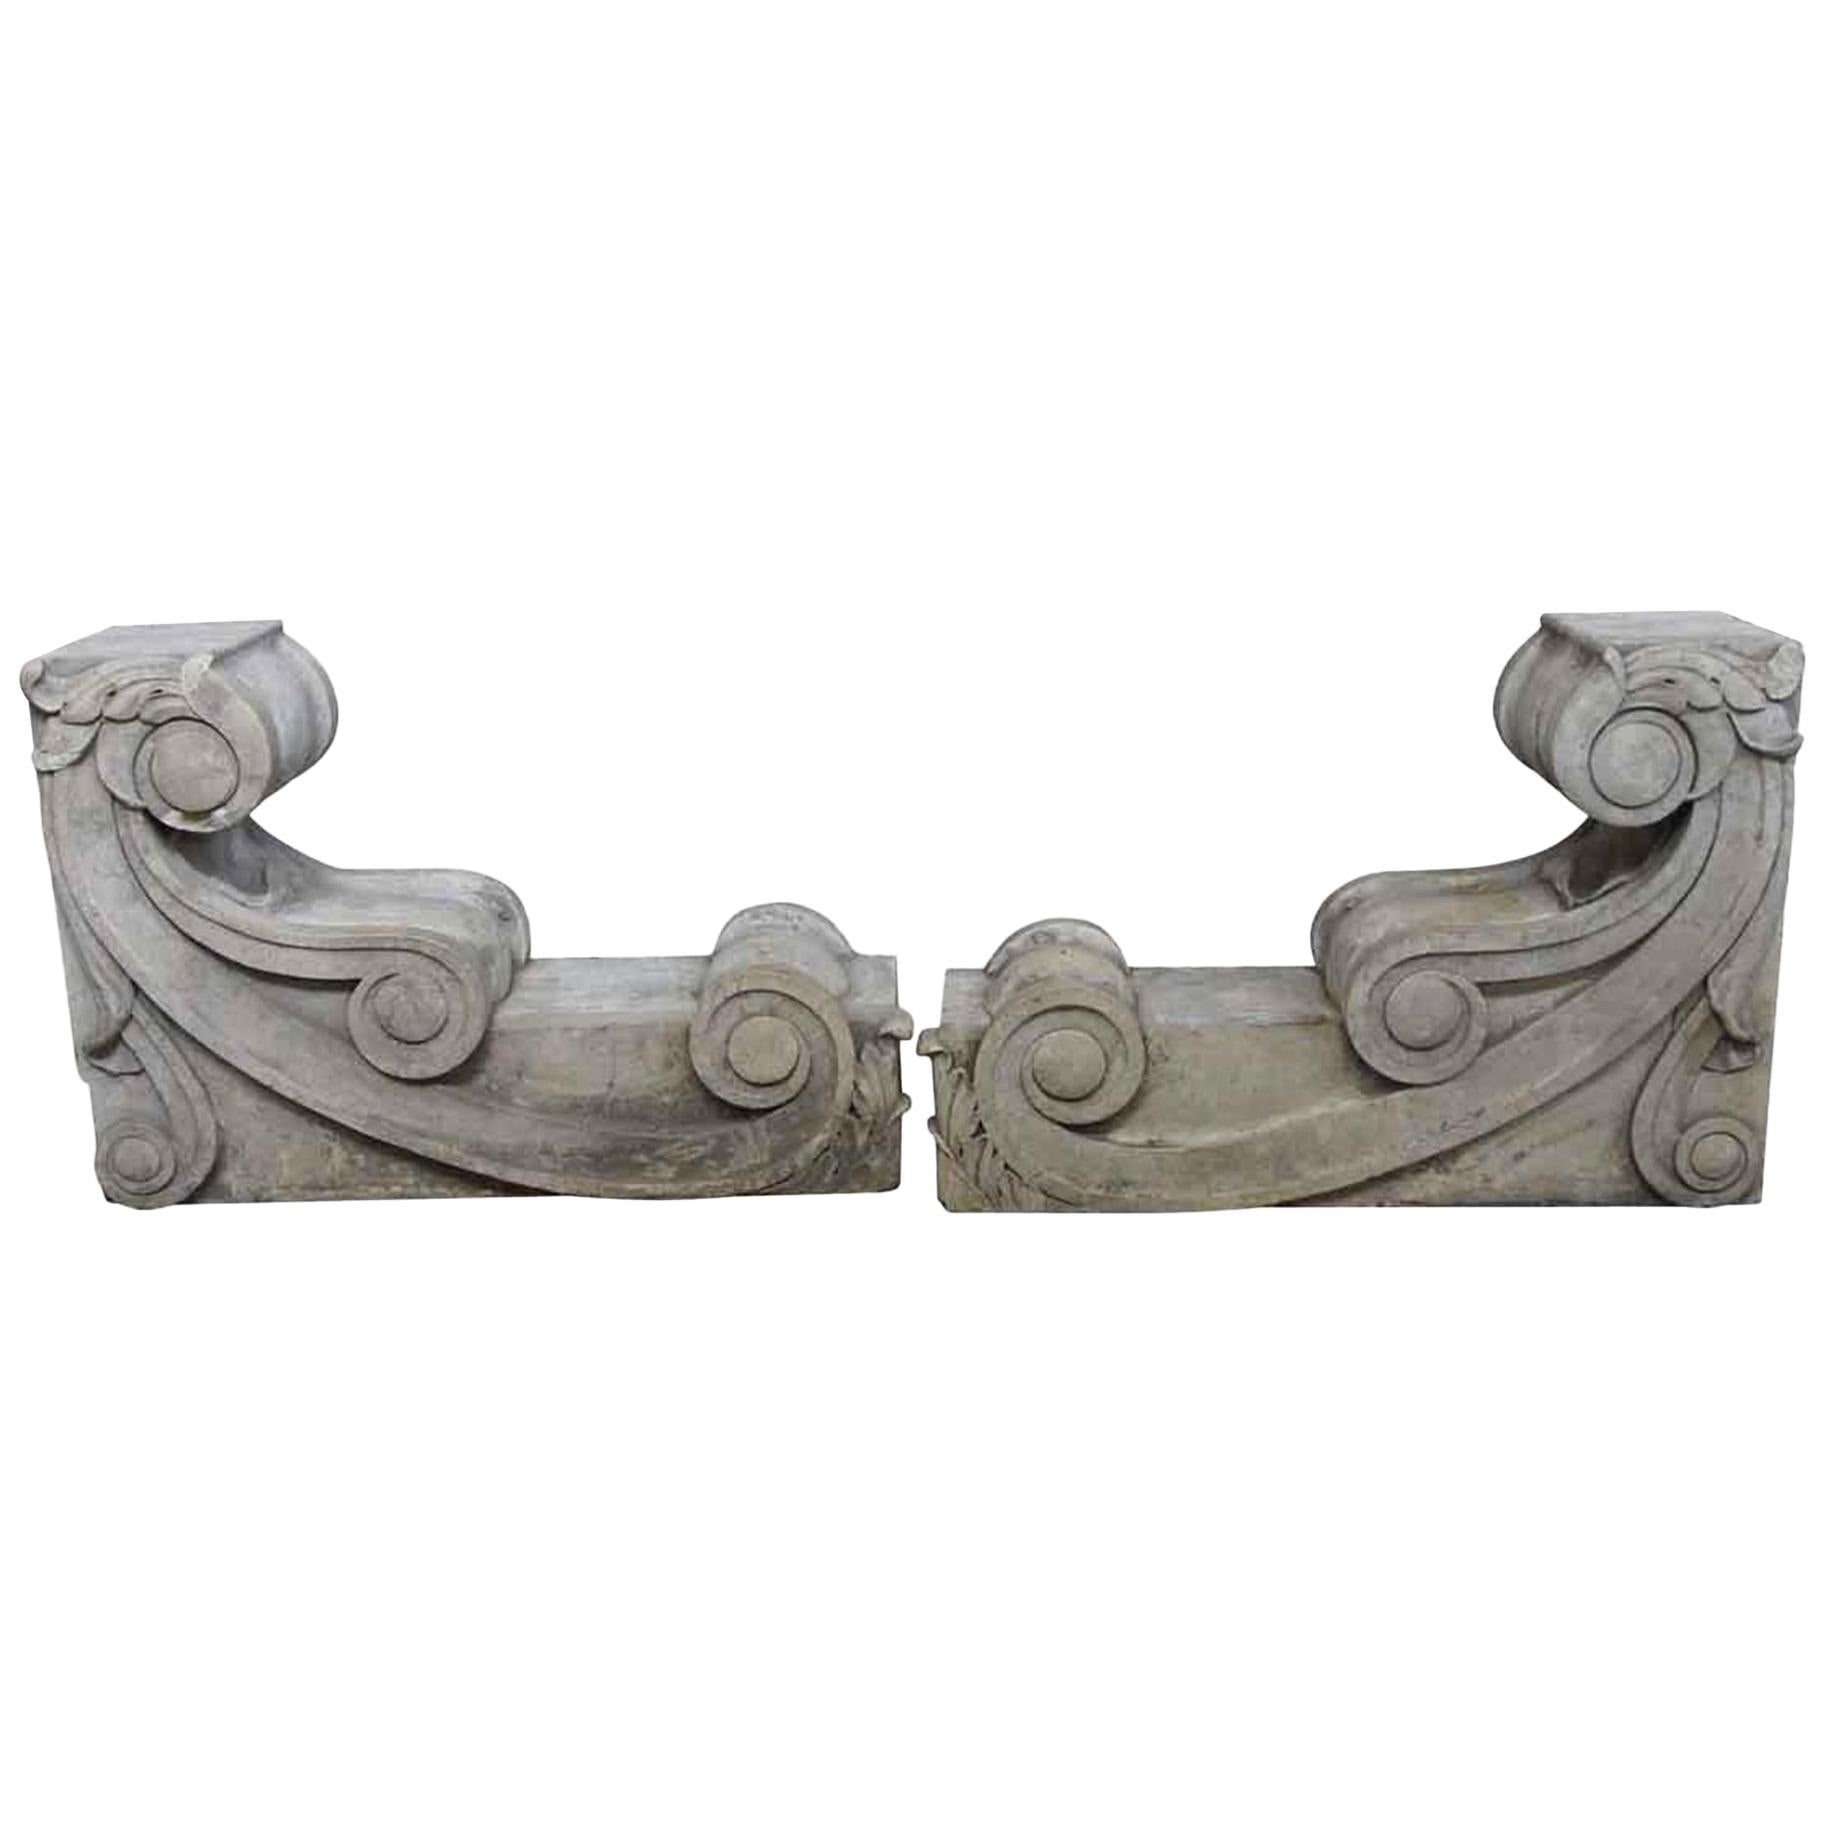 1910 Carved Stone Corbels from a New York City Building